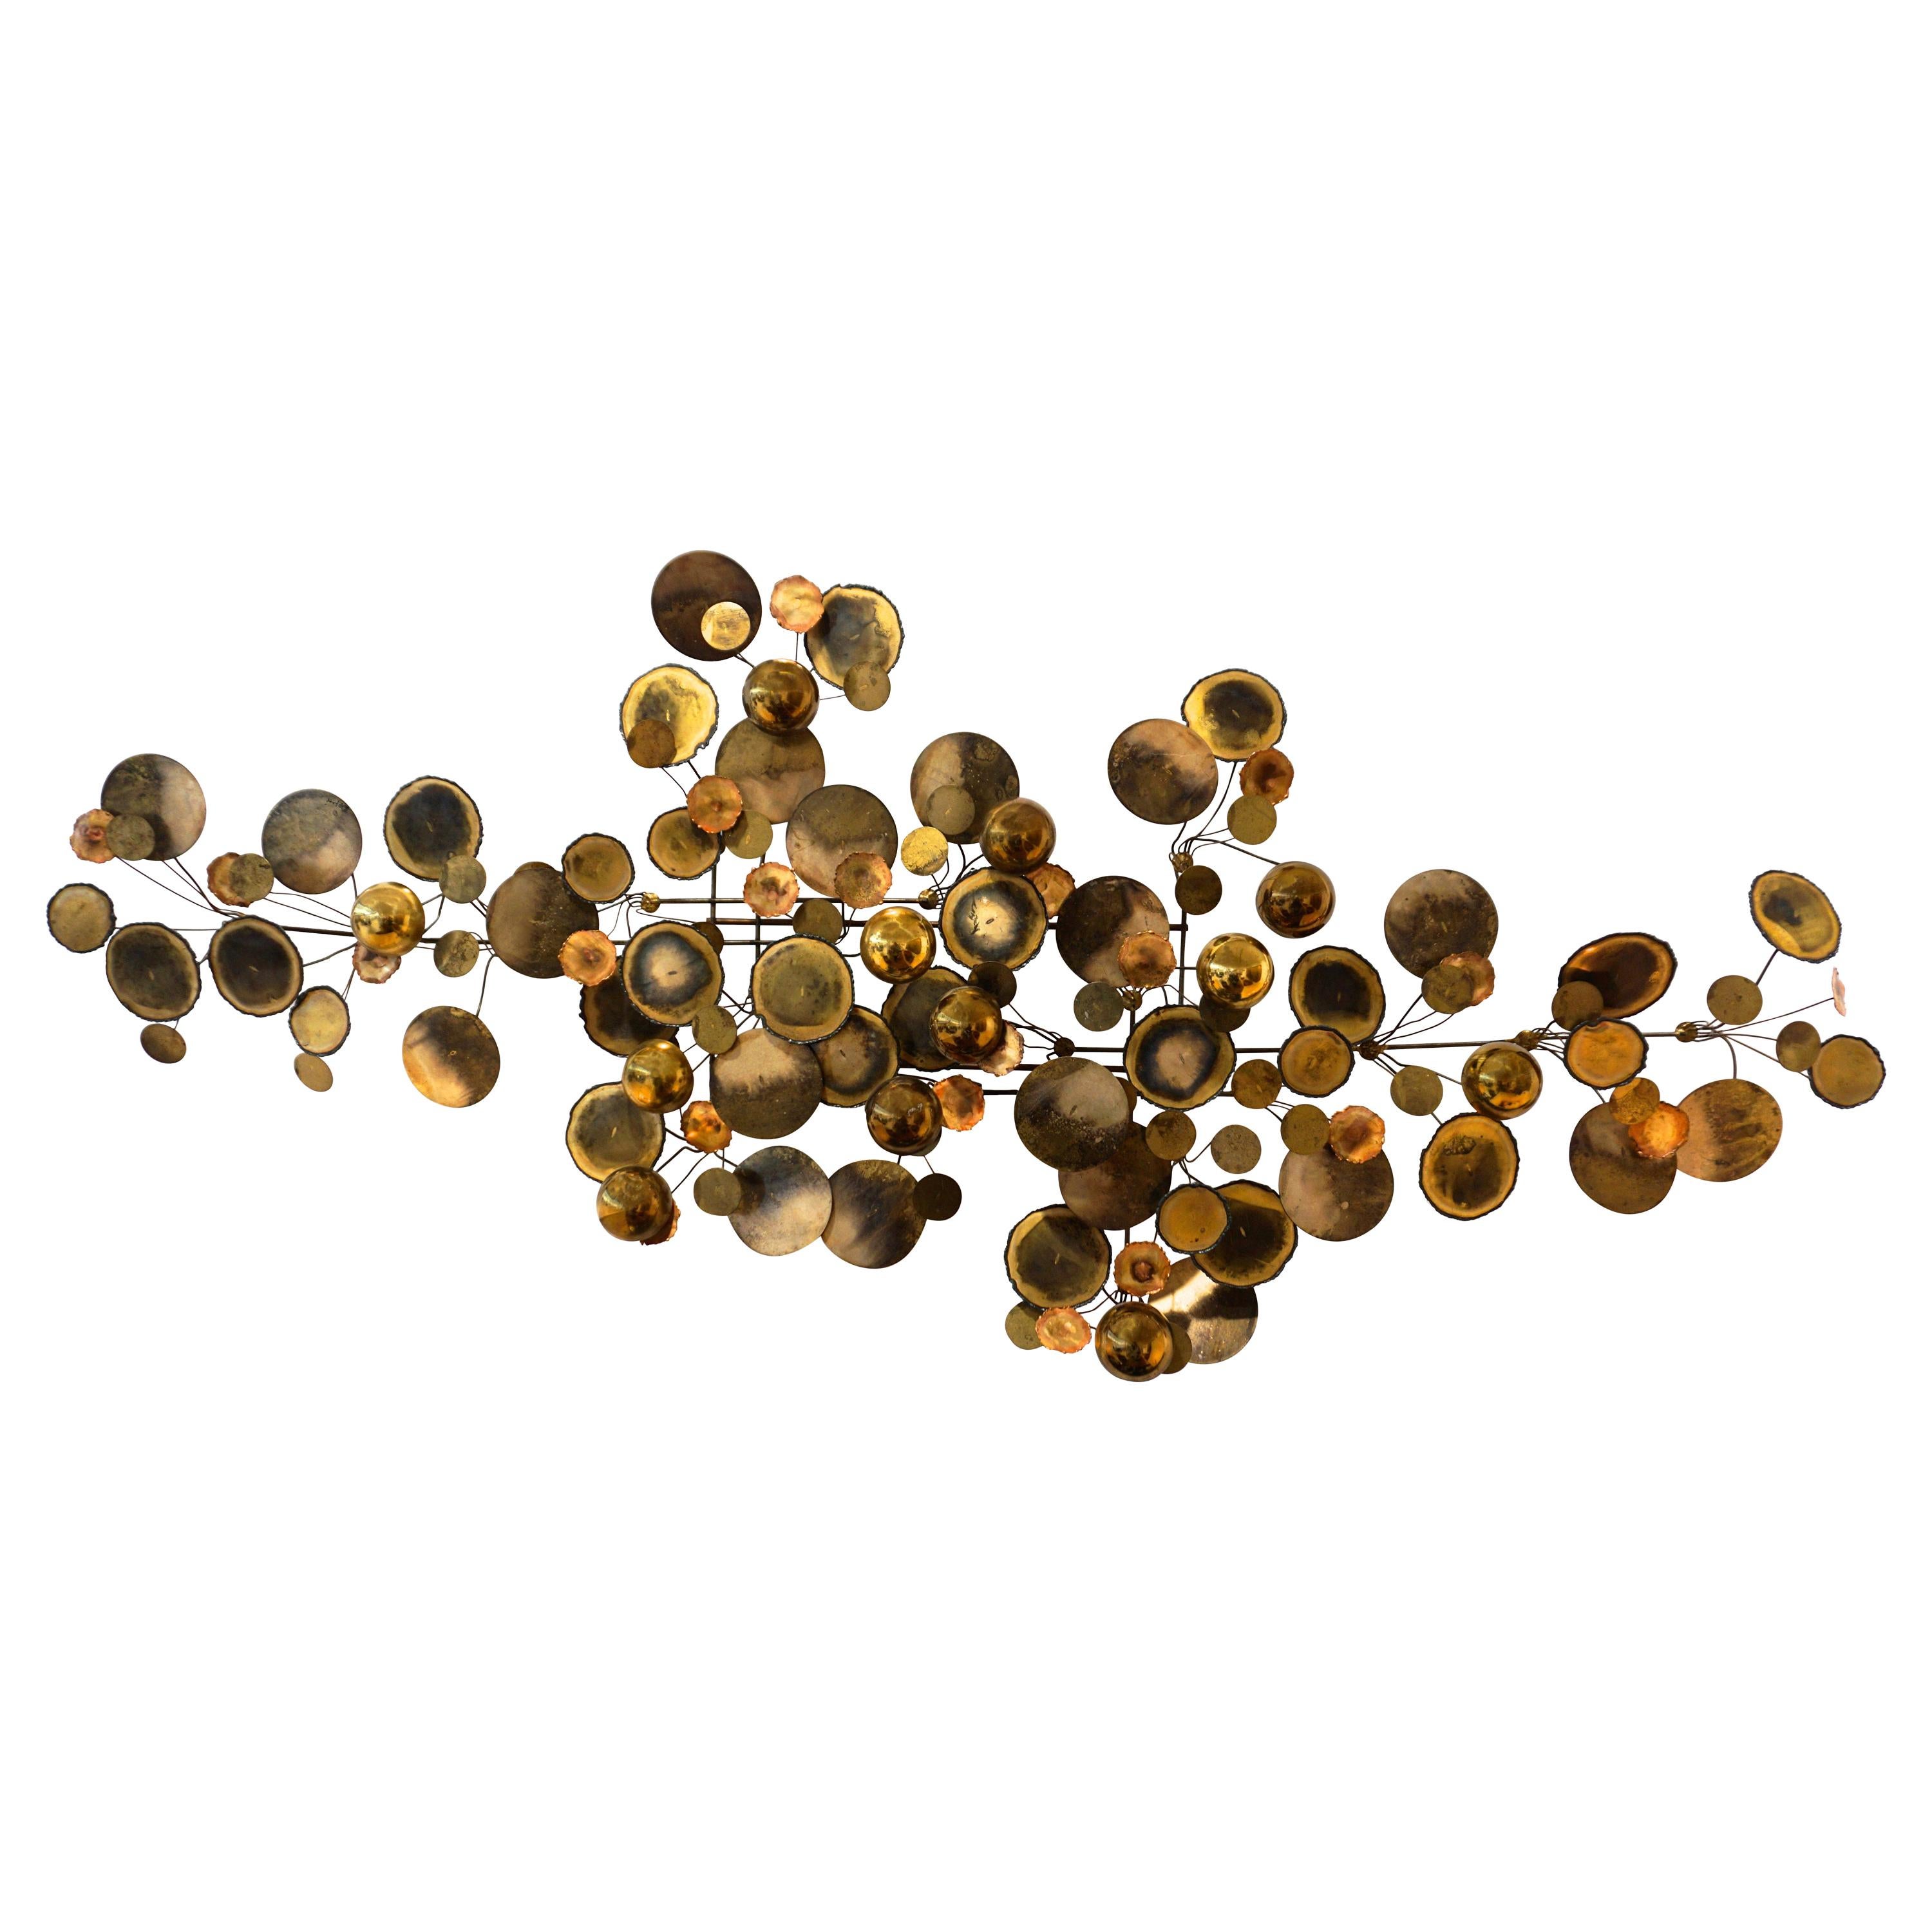 Brass Raindrops Metal Wall Sculpture by Curtis Jere